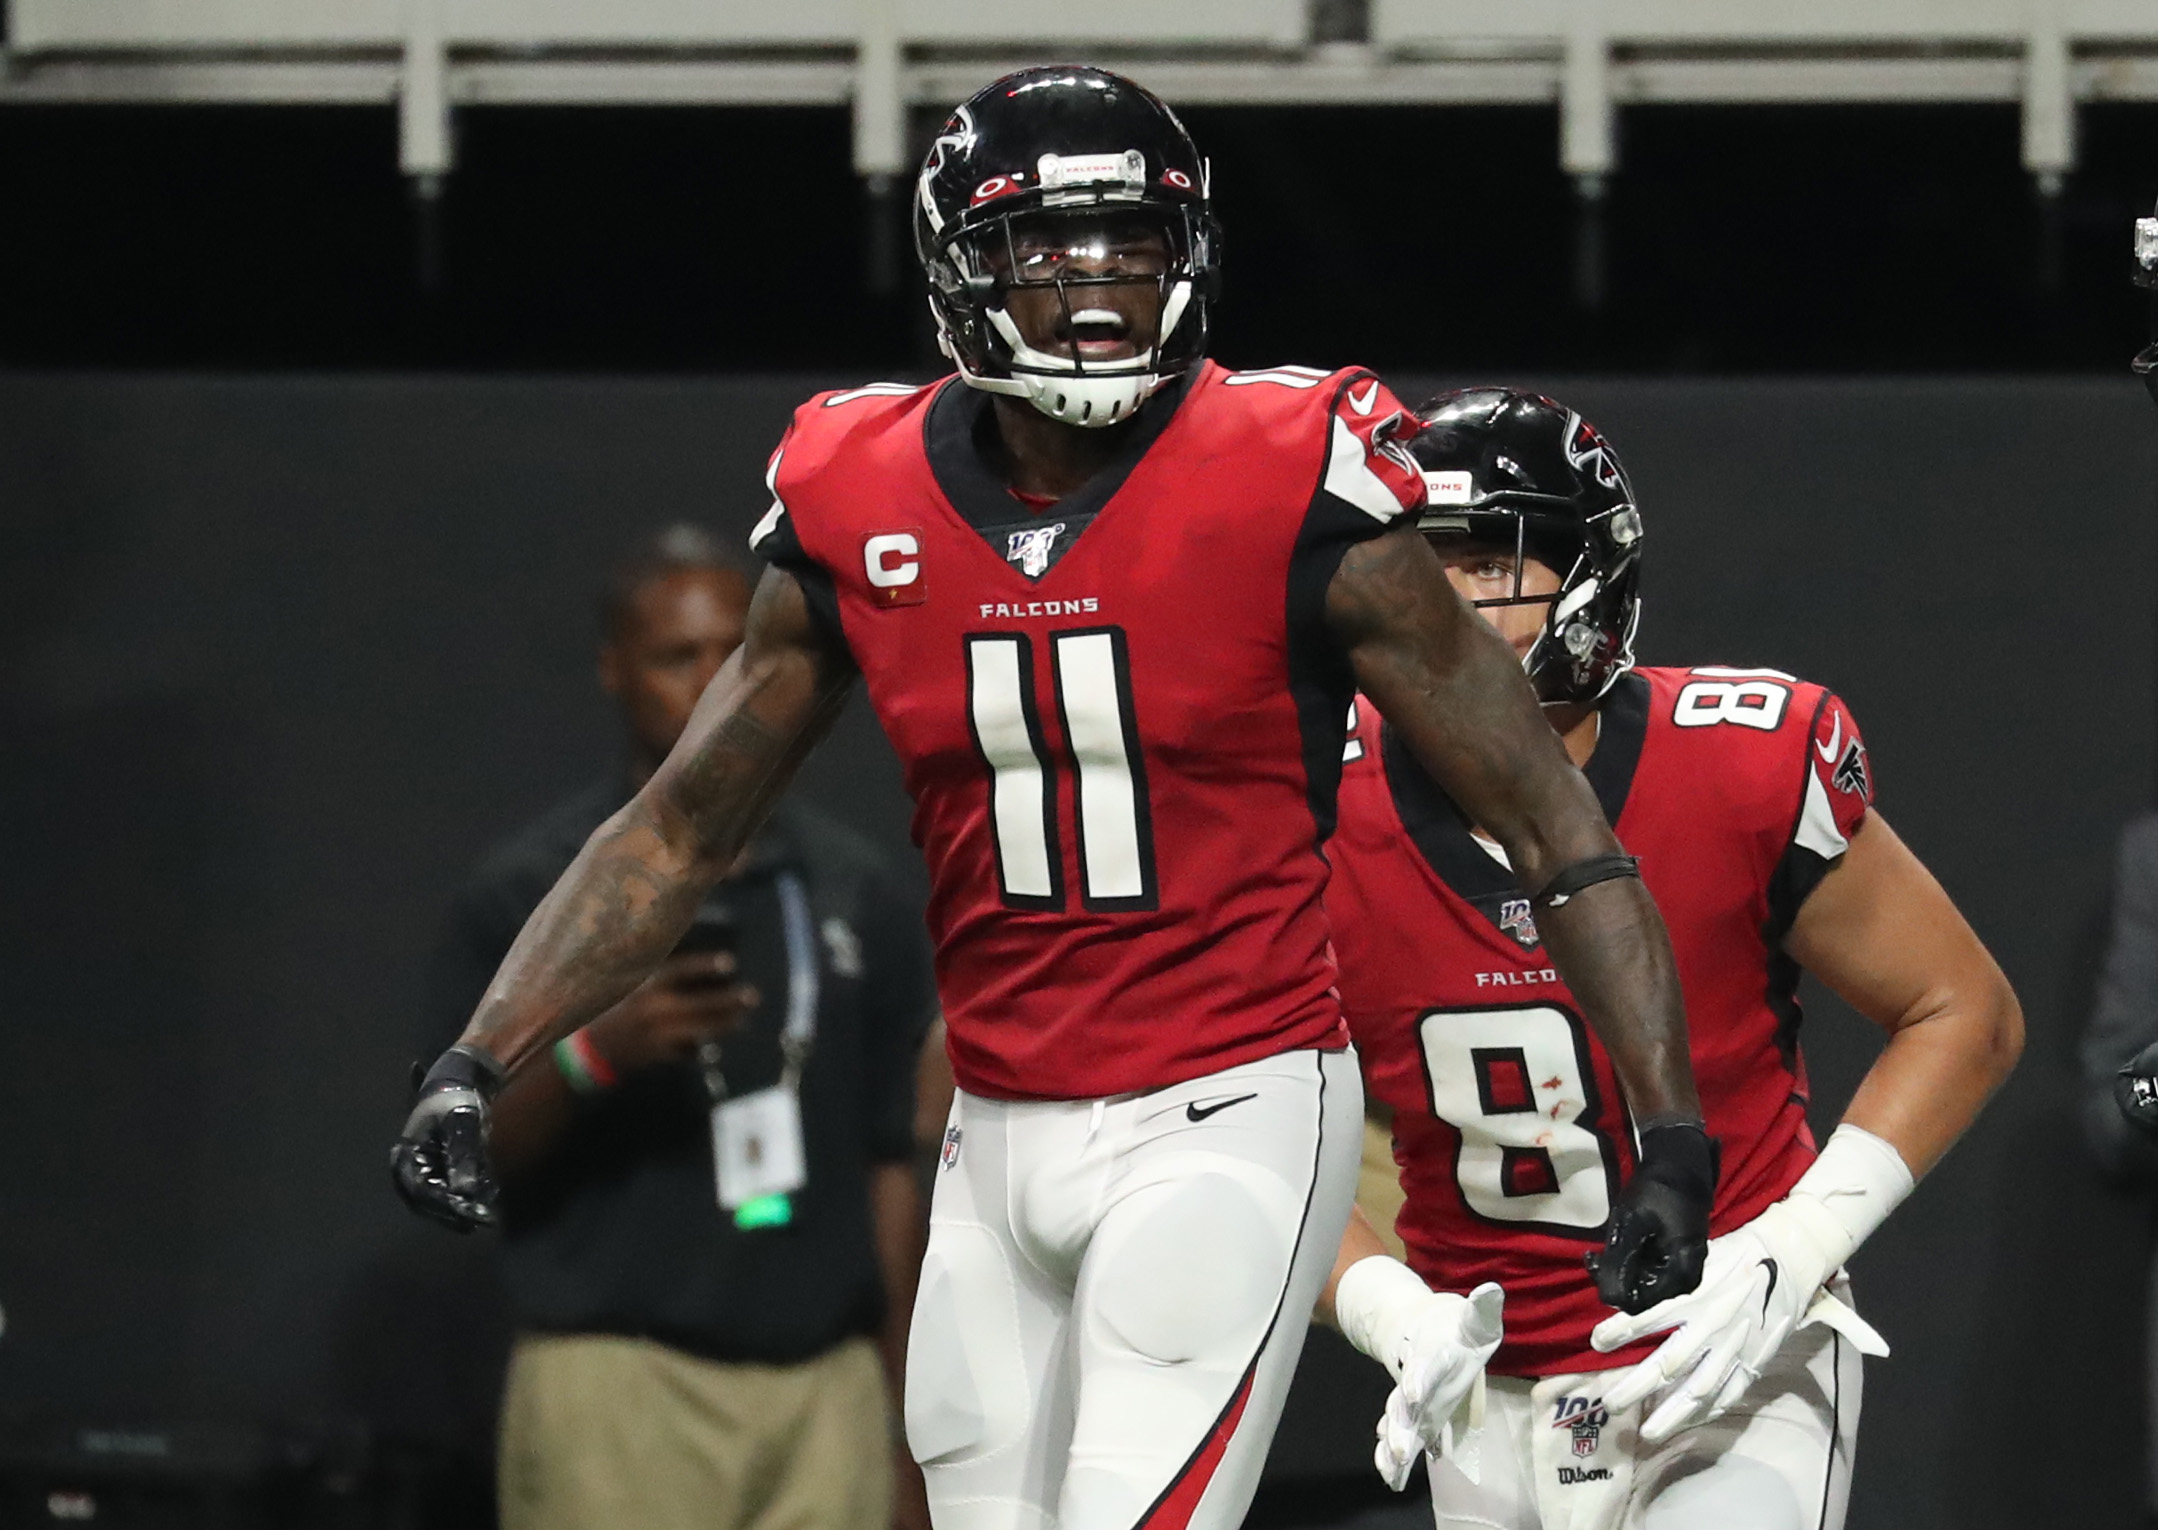 NFL free agents 2022: Best remaining wide receivers on the market -  DraftKings Network